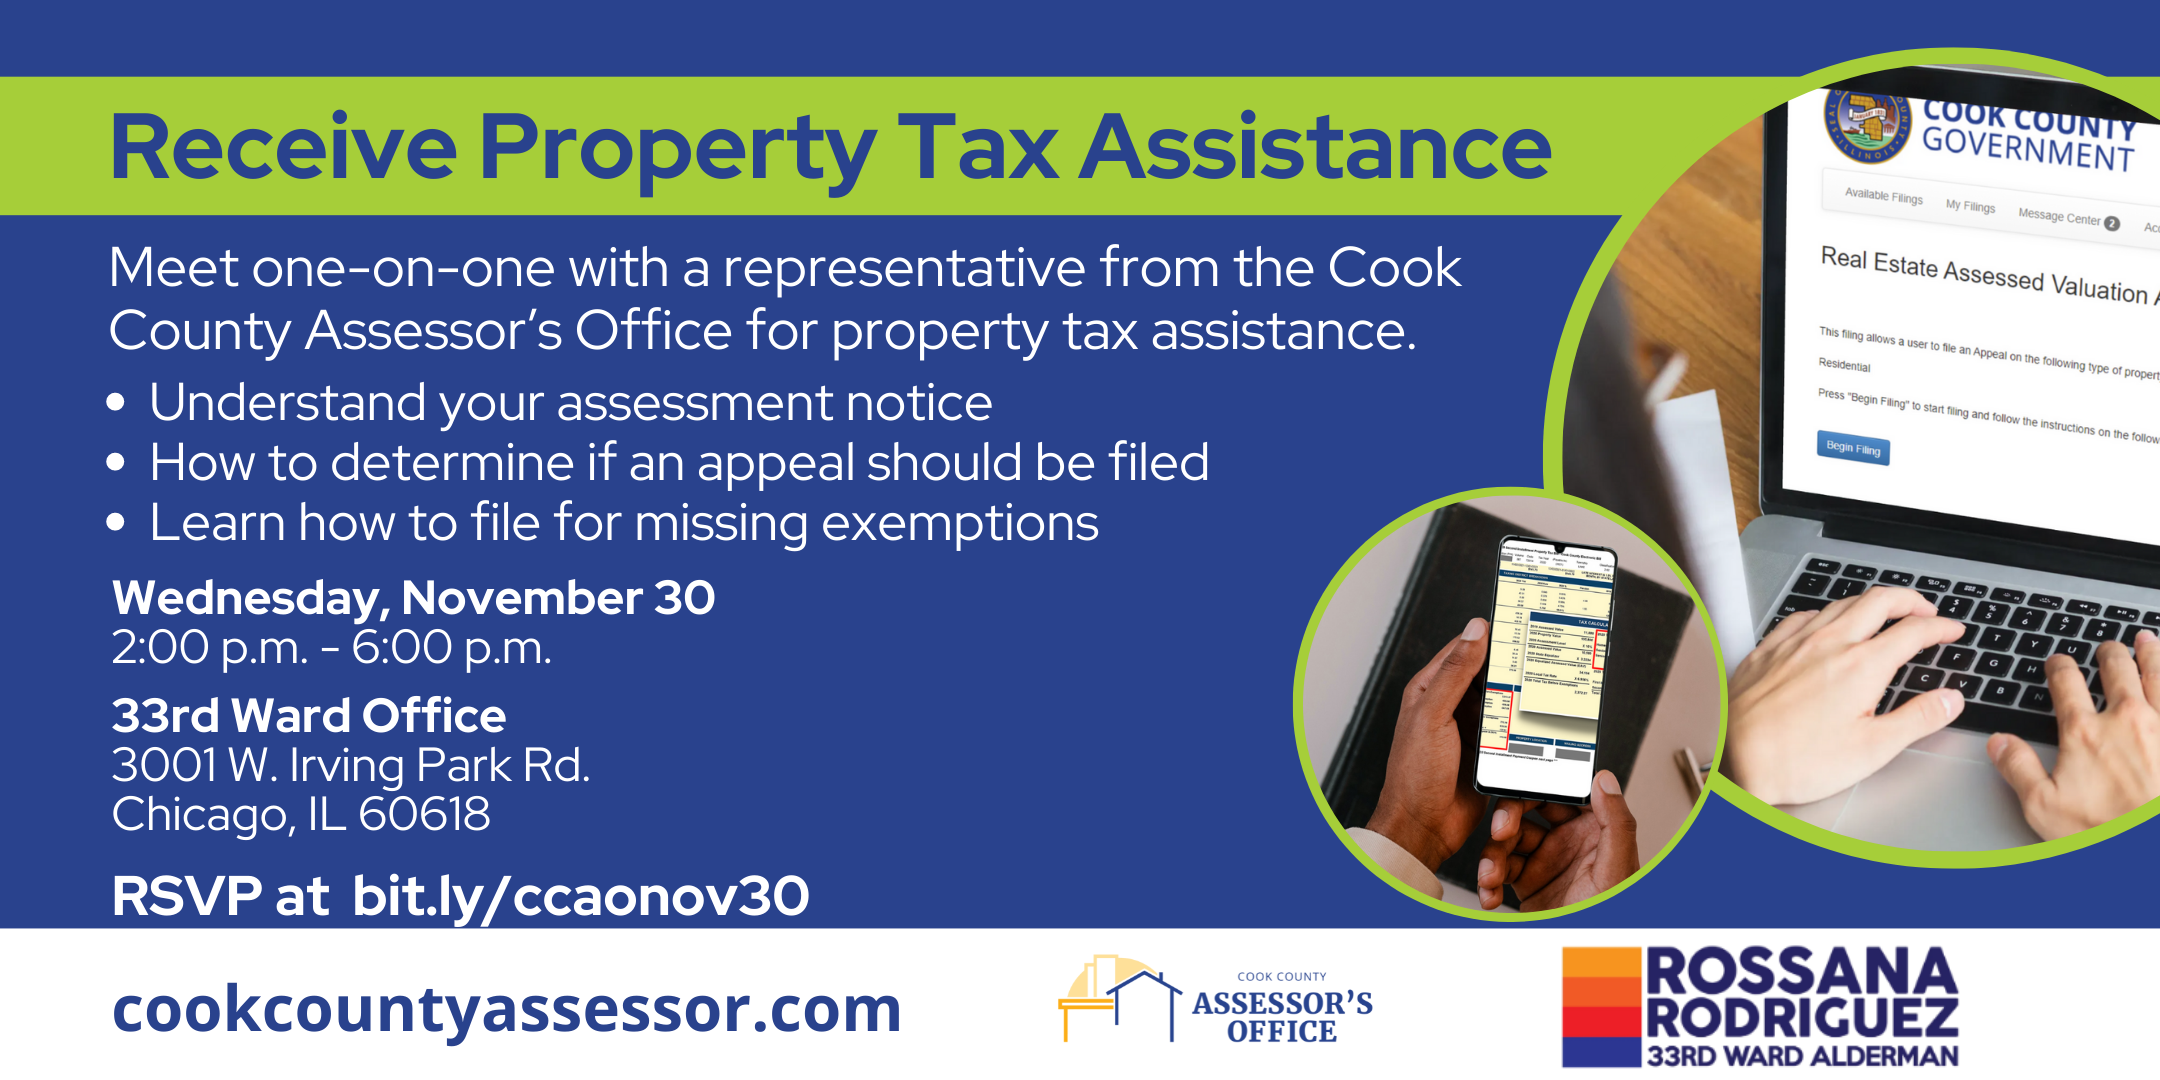 receive property tax assistance november 30th 2022 jefferson 